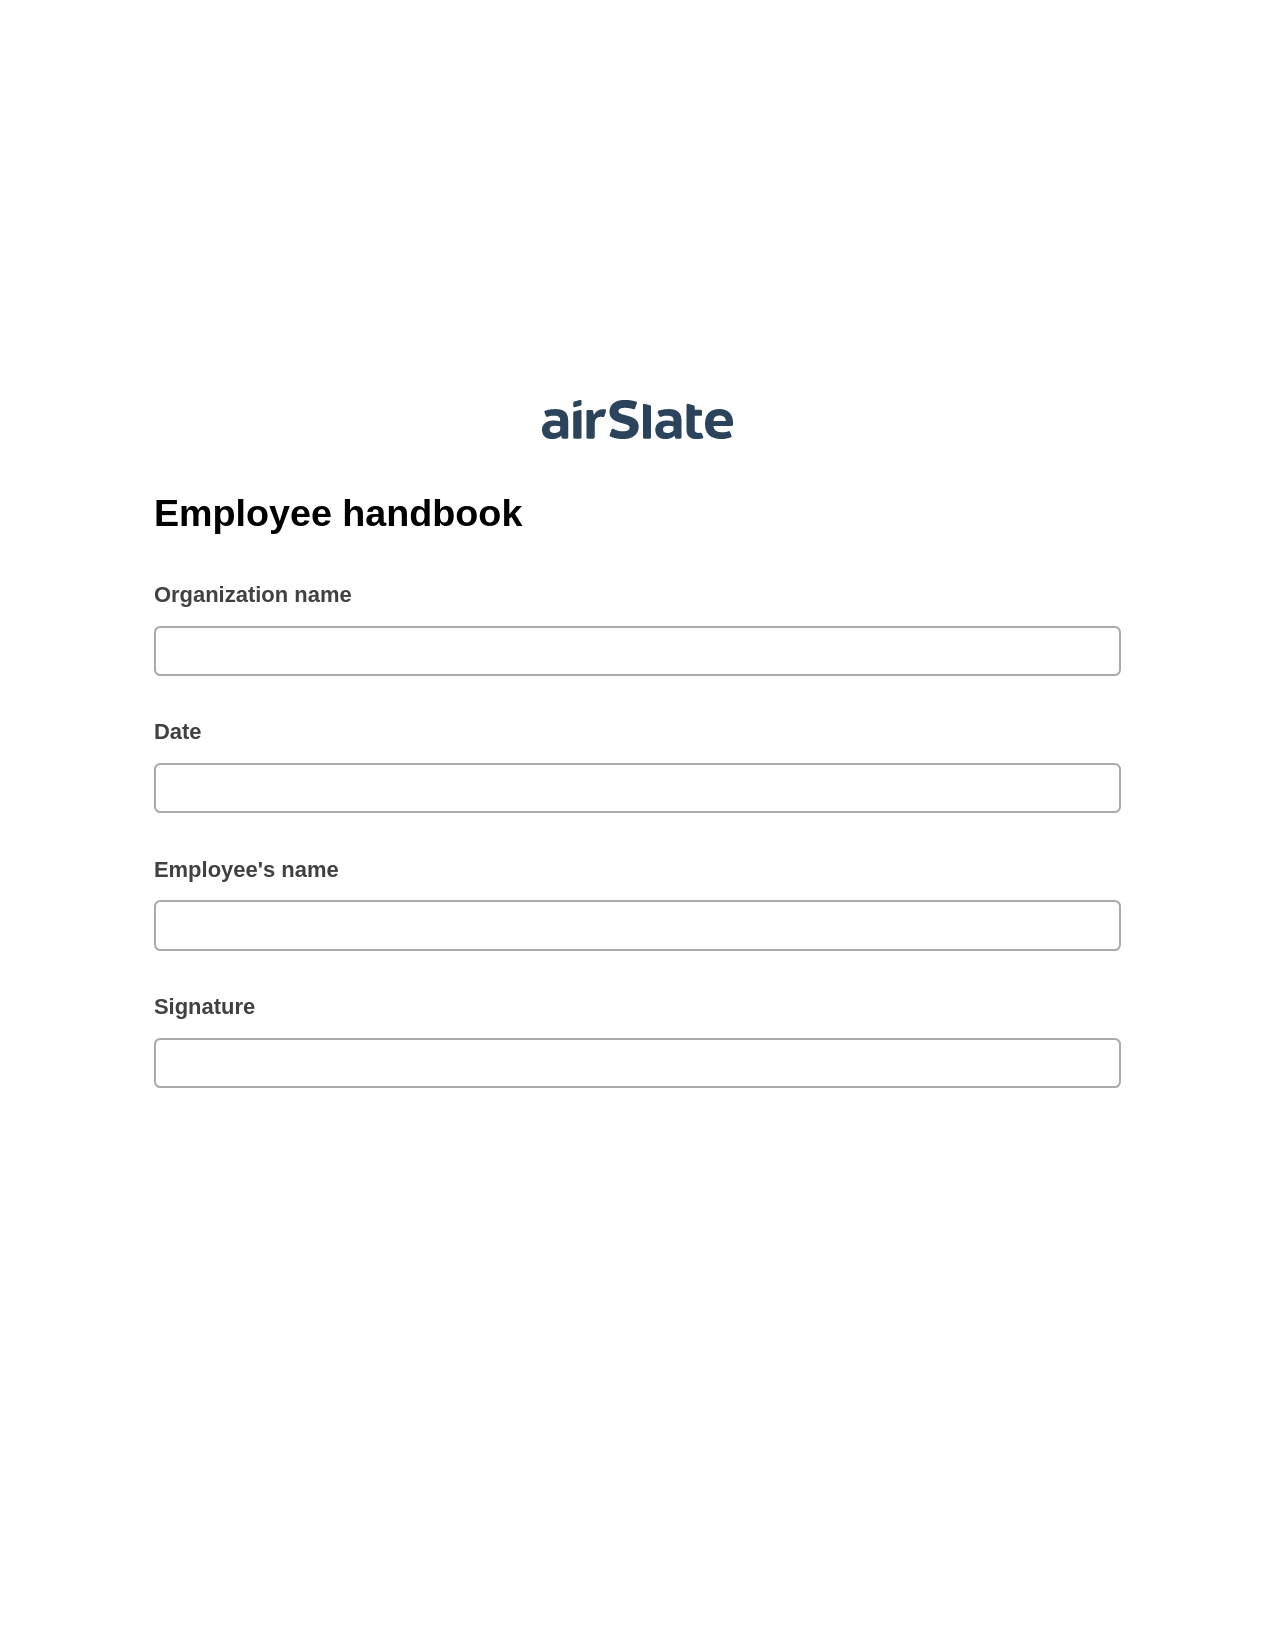 Multirole Employee handbook Pre-fill from Salesforce Record Bot, Pre-fill with Custom Data Bot, Email Notification Postfinish Bot